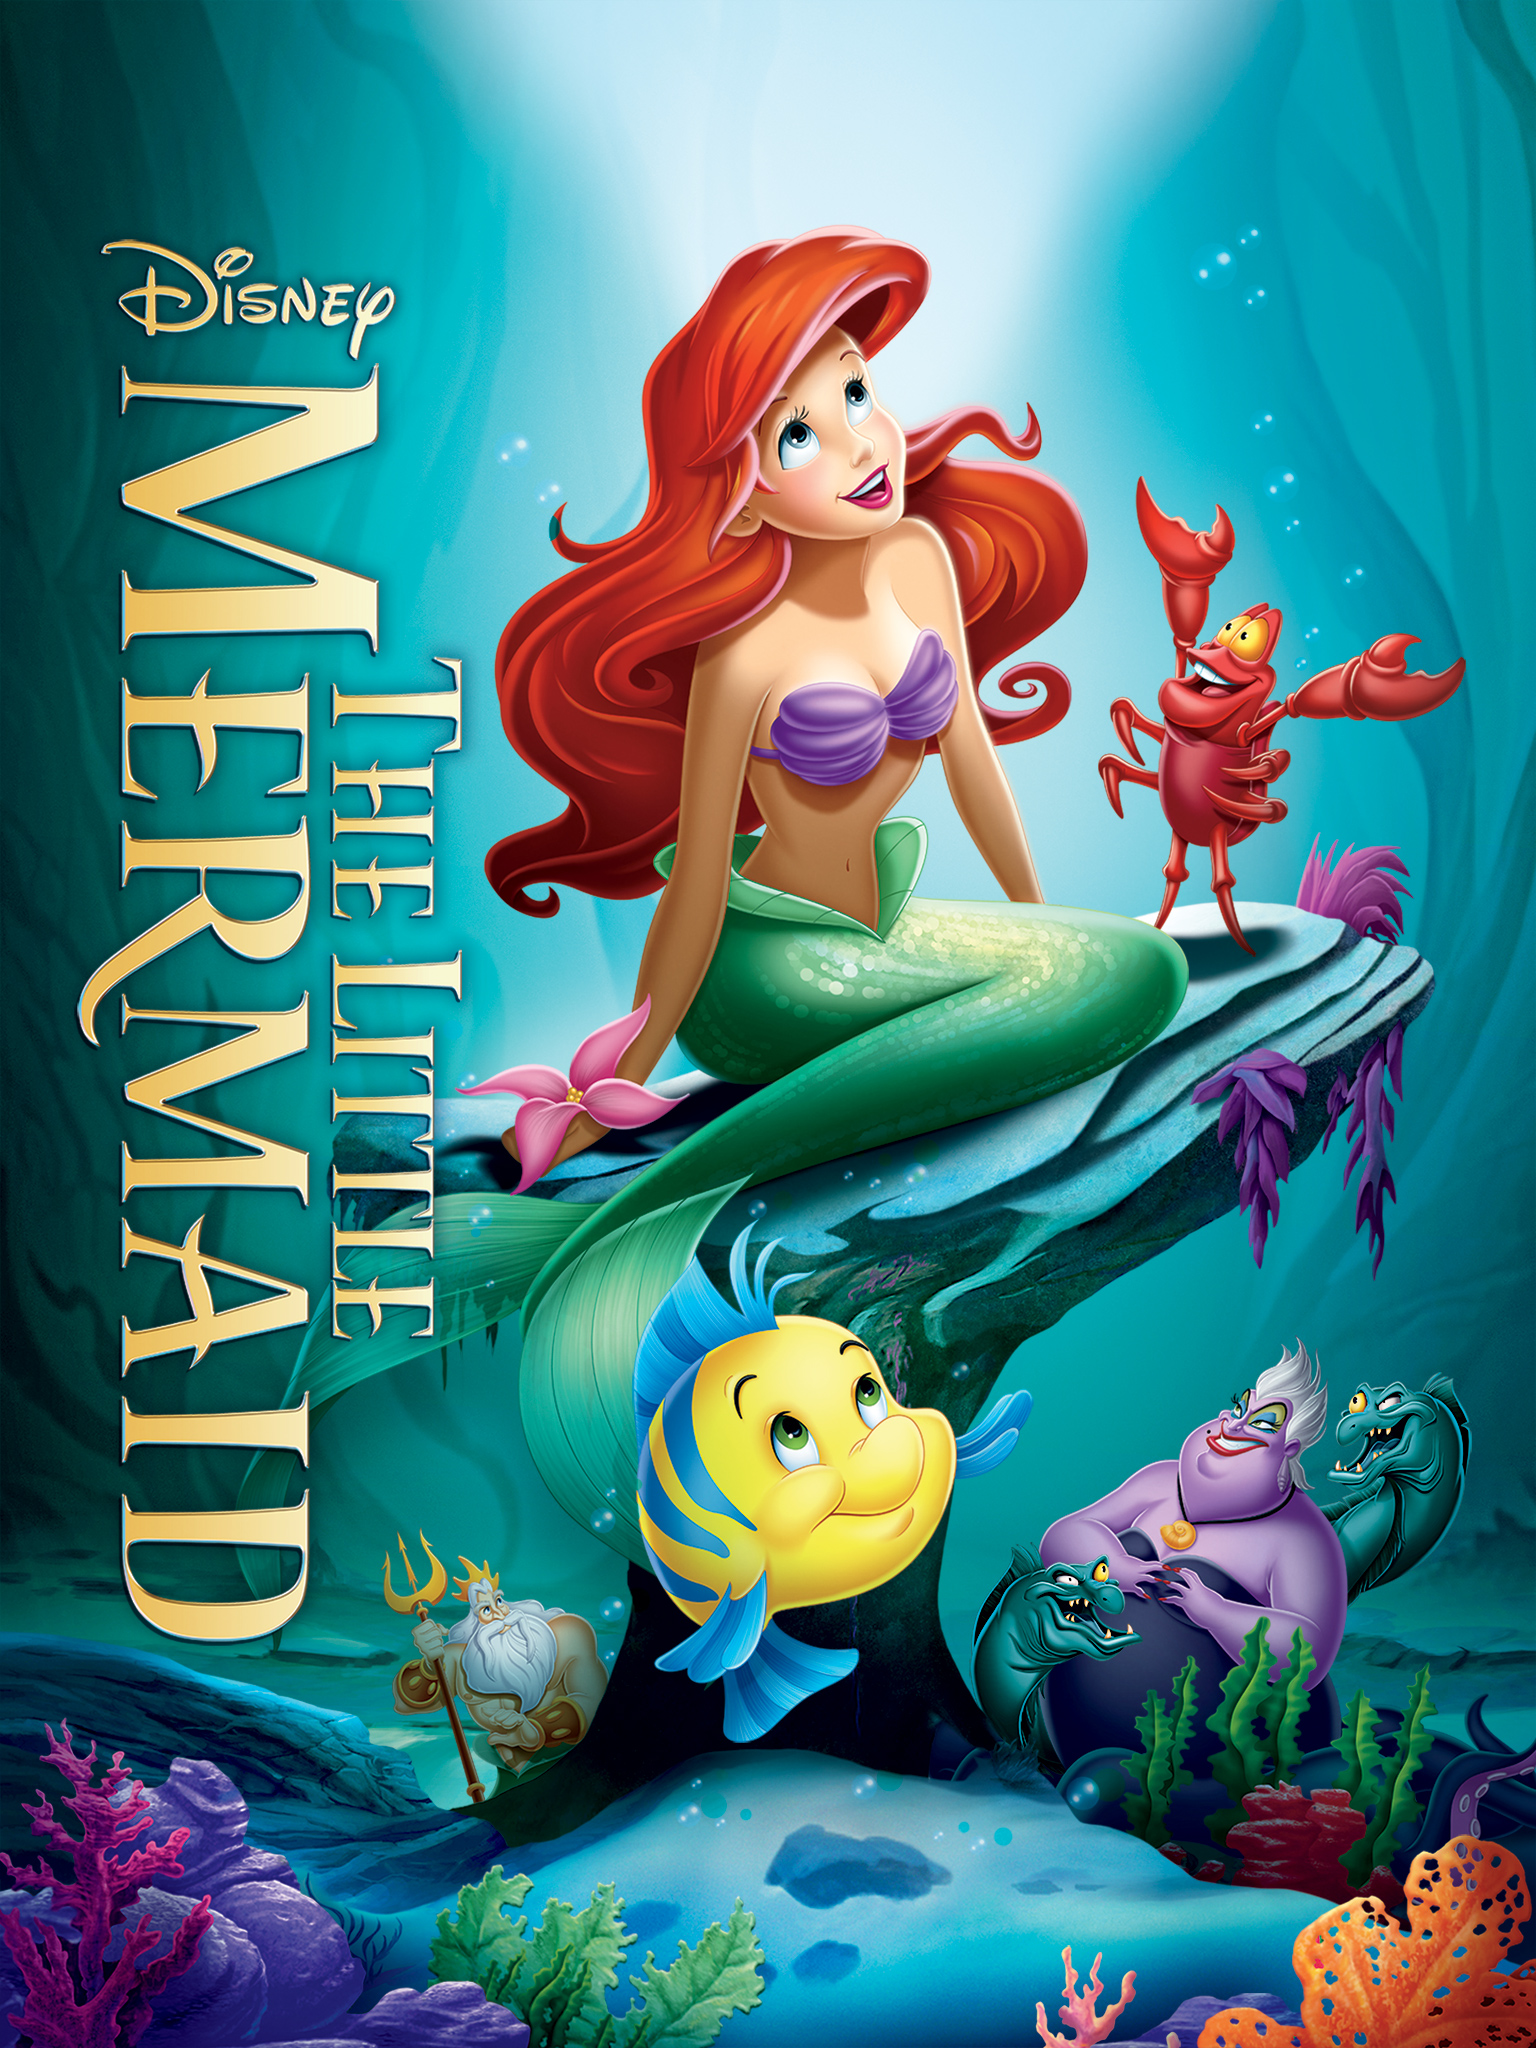 christian movie review of little mermaid